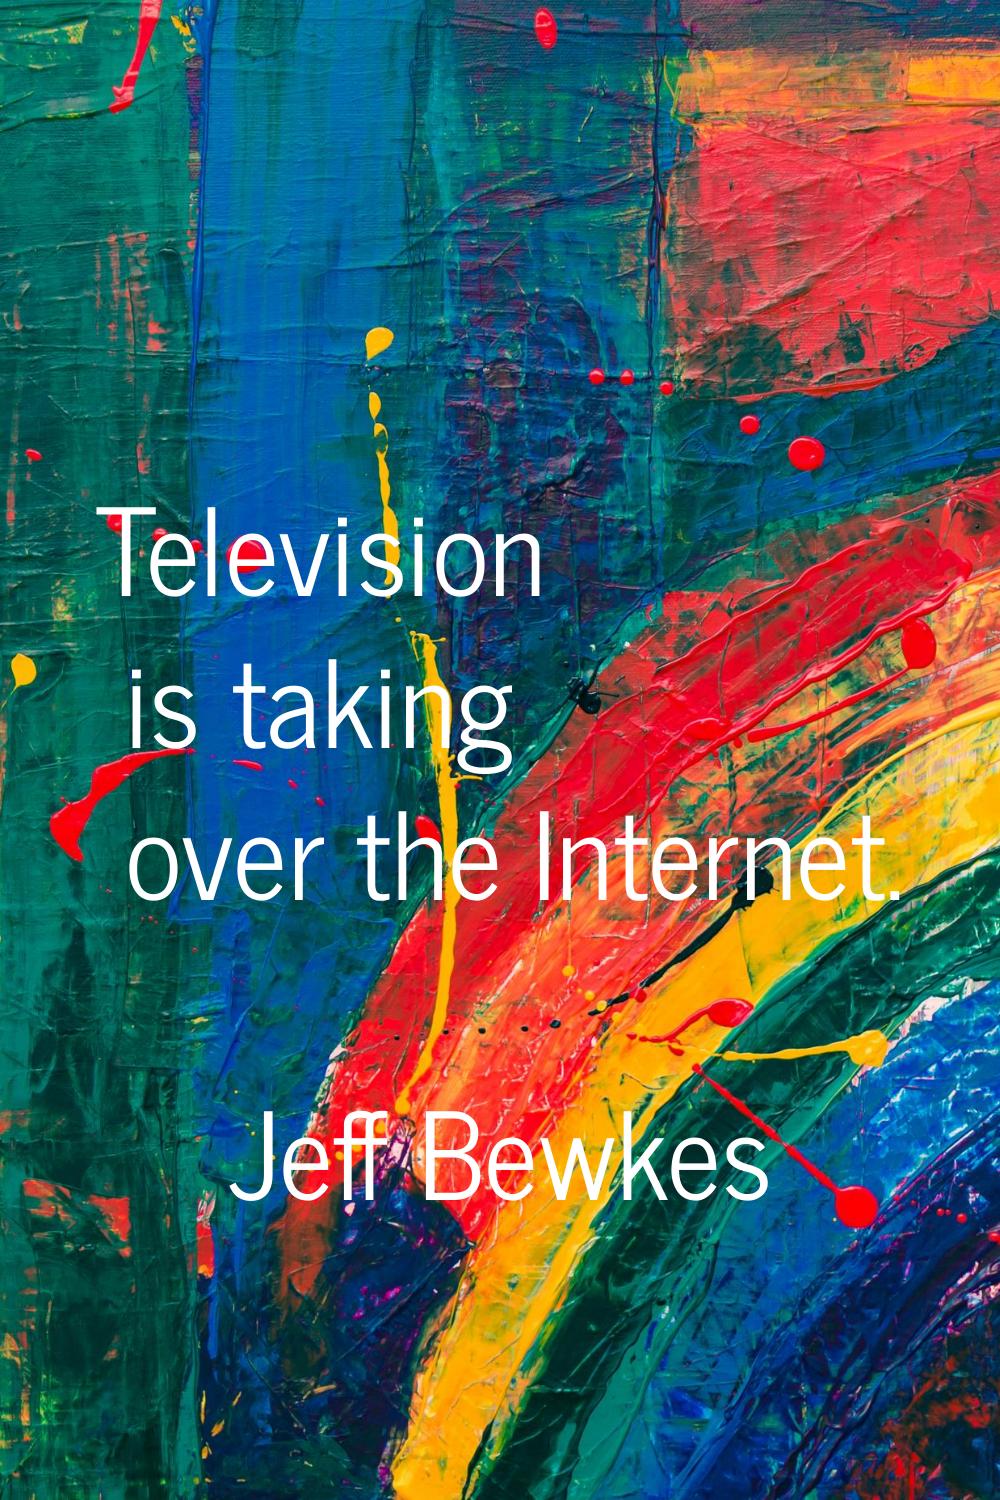 Television is taking over the Internet.